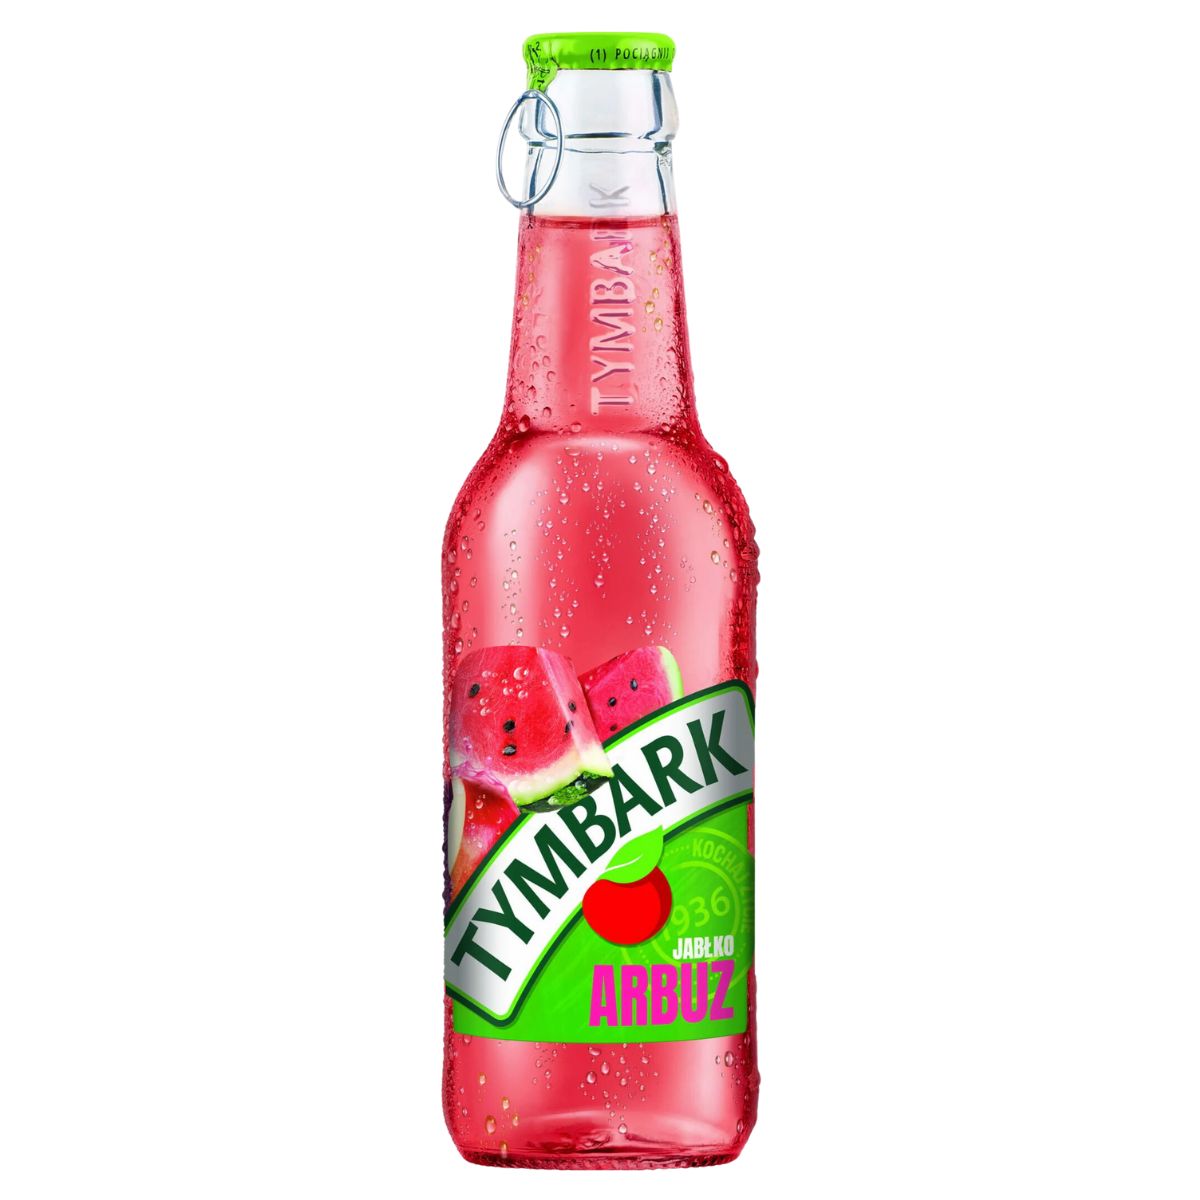 A bottle of Tymbark - Arbuz Watermelon - 250ml on a white background.